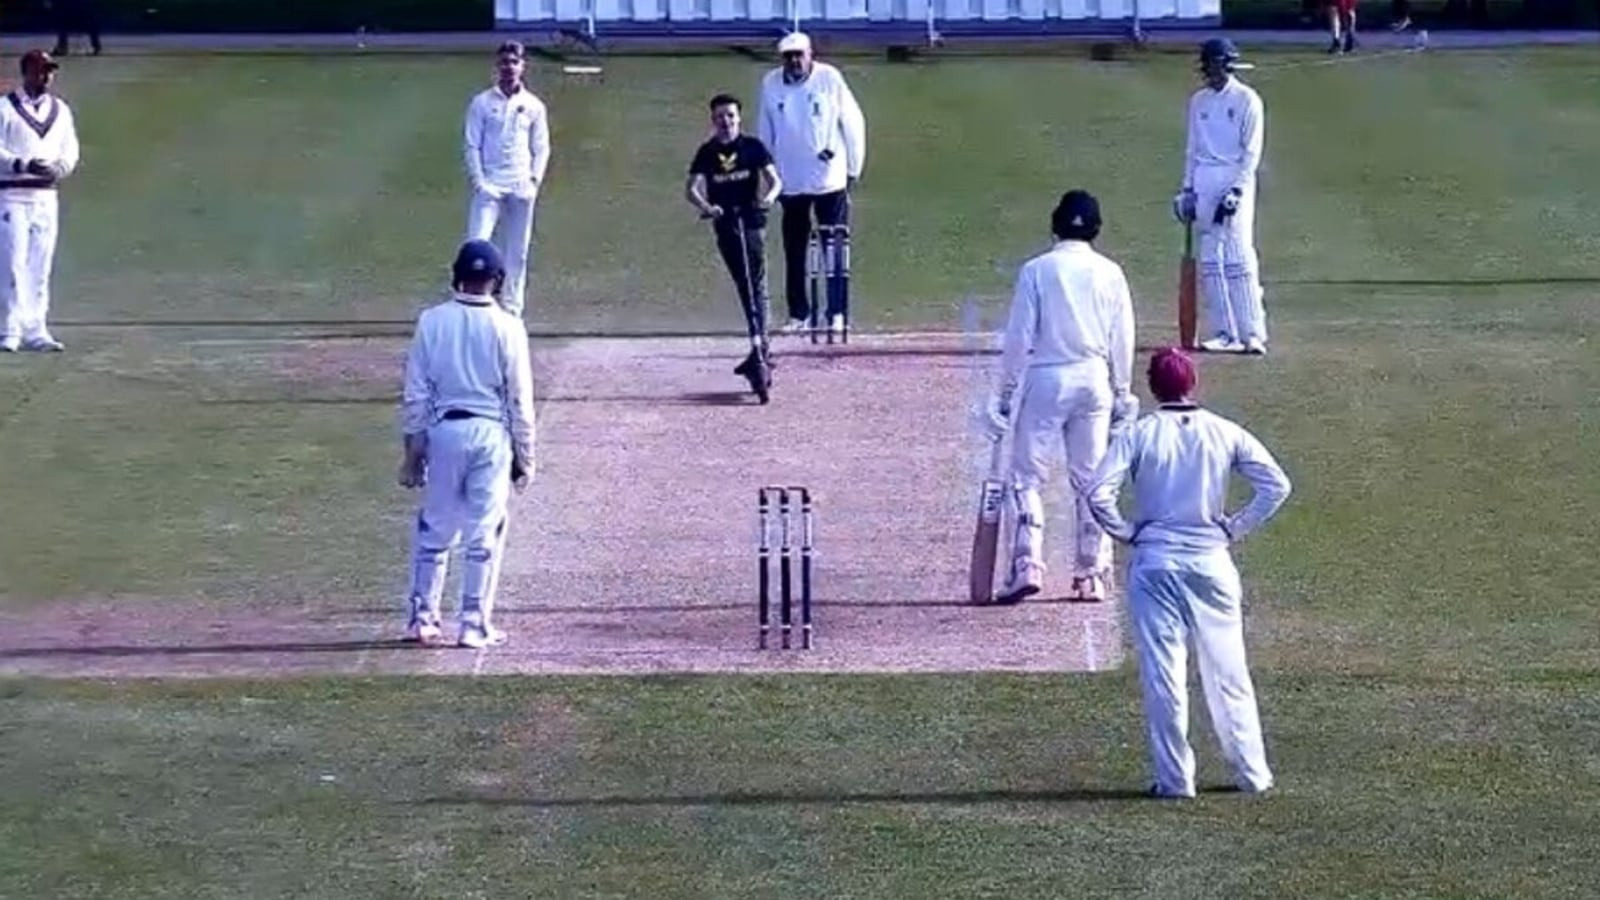 Watch Man rides scooter in middle of pitch, cricket match comes to bizarre halt Cricket